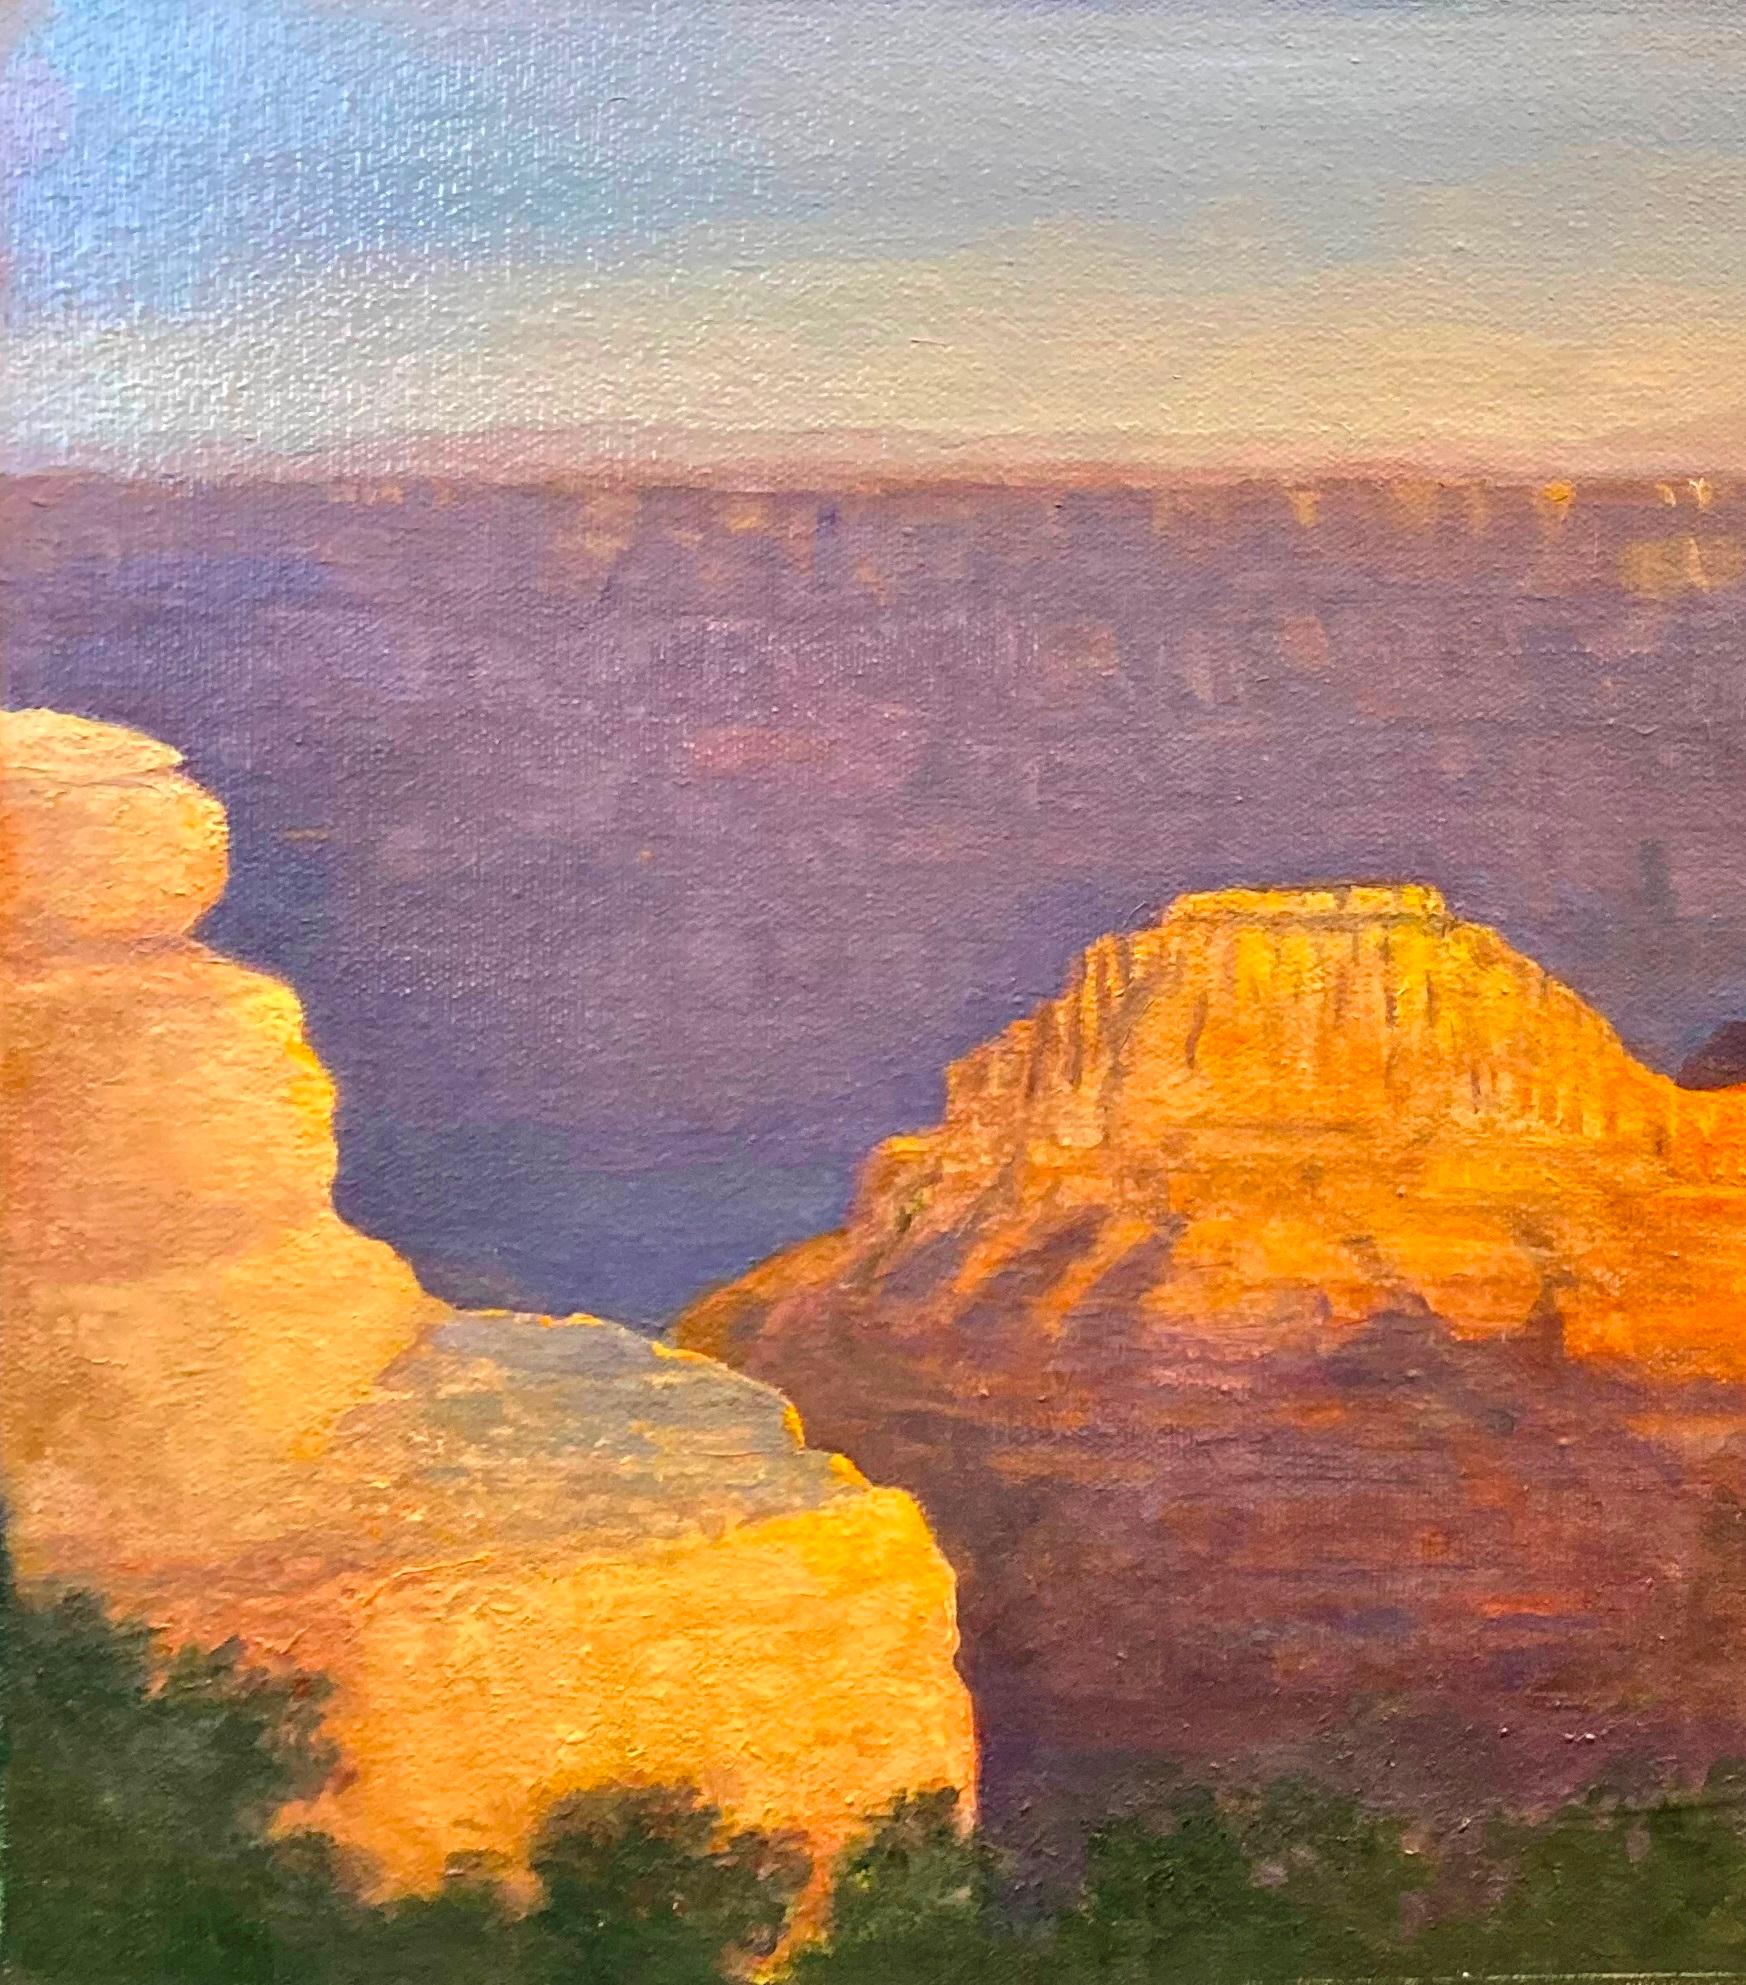 Drama of the Sunset at the Brahma Temple in the Grand Canyon is Awe Inspiring - Painting by Nancy Pellatt